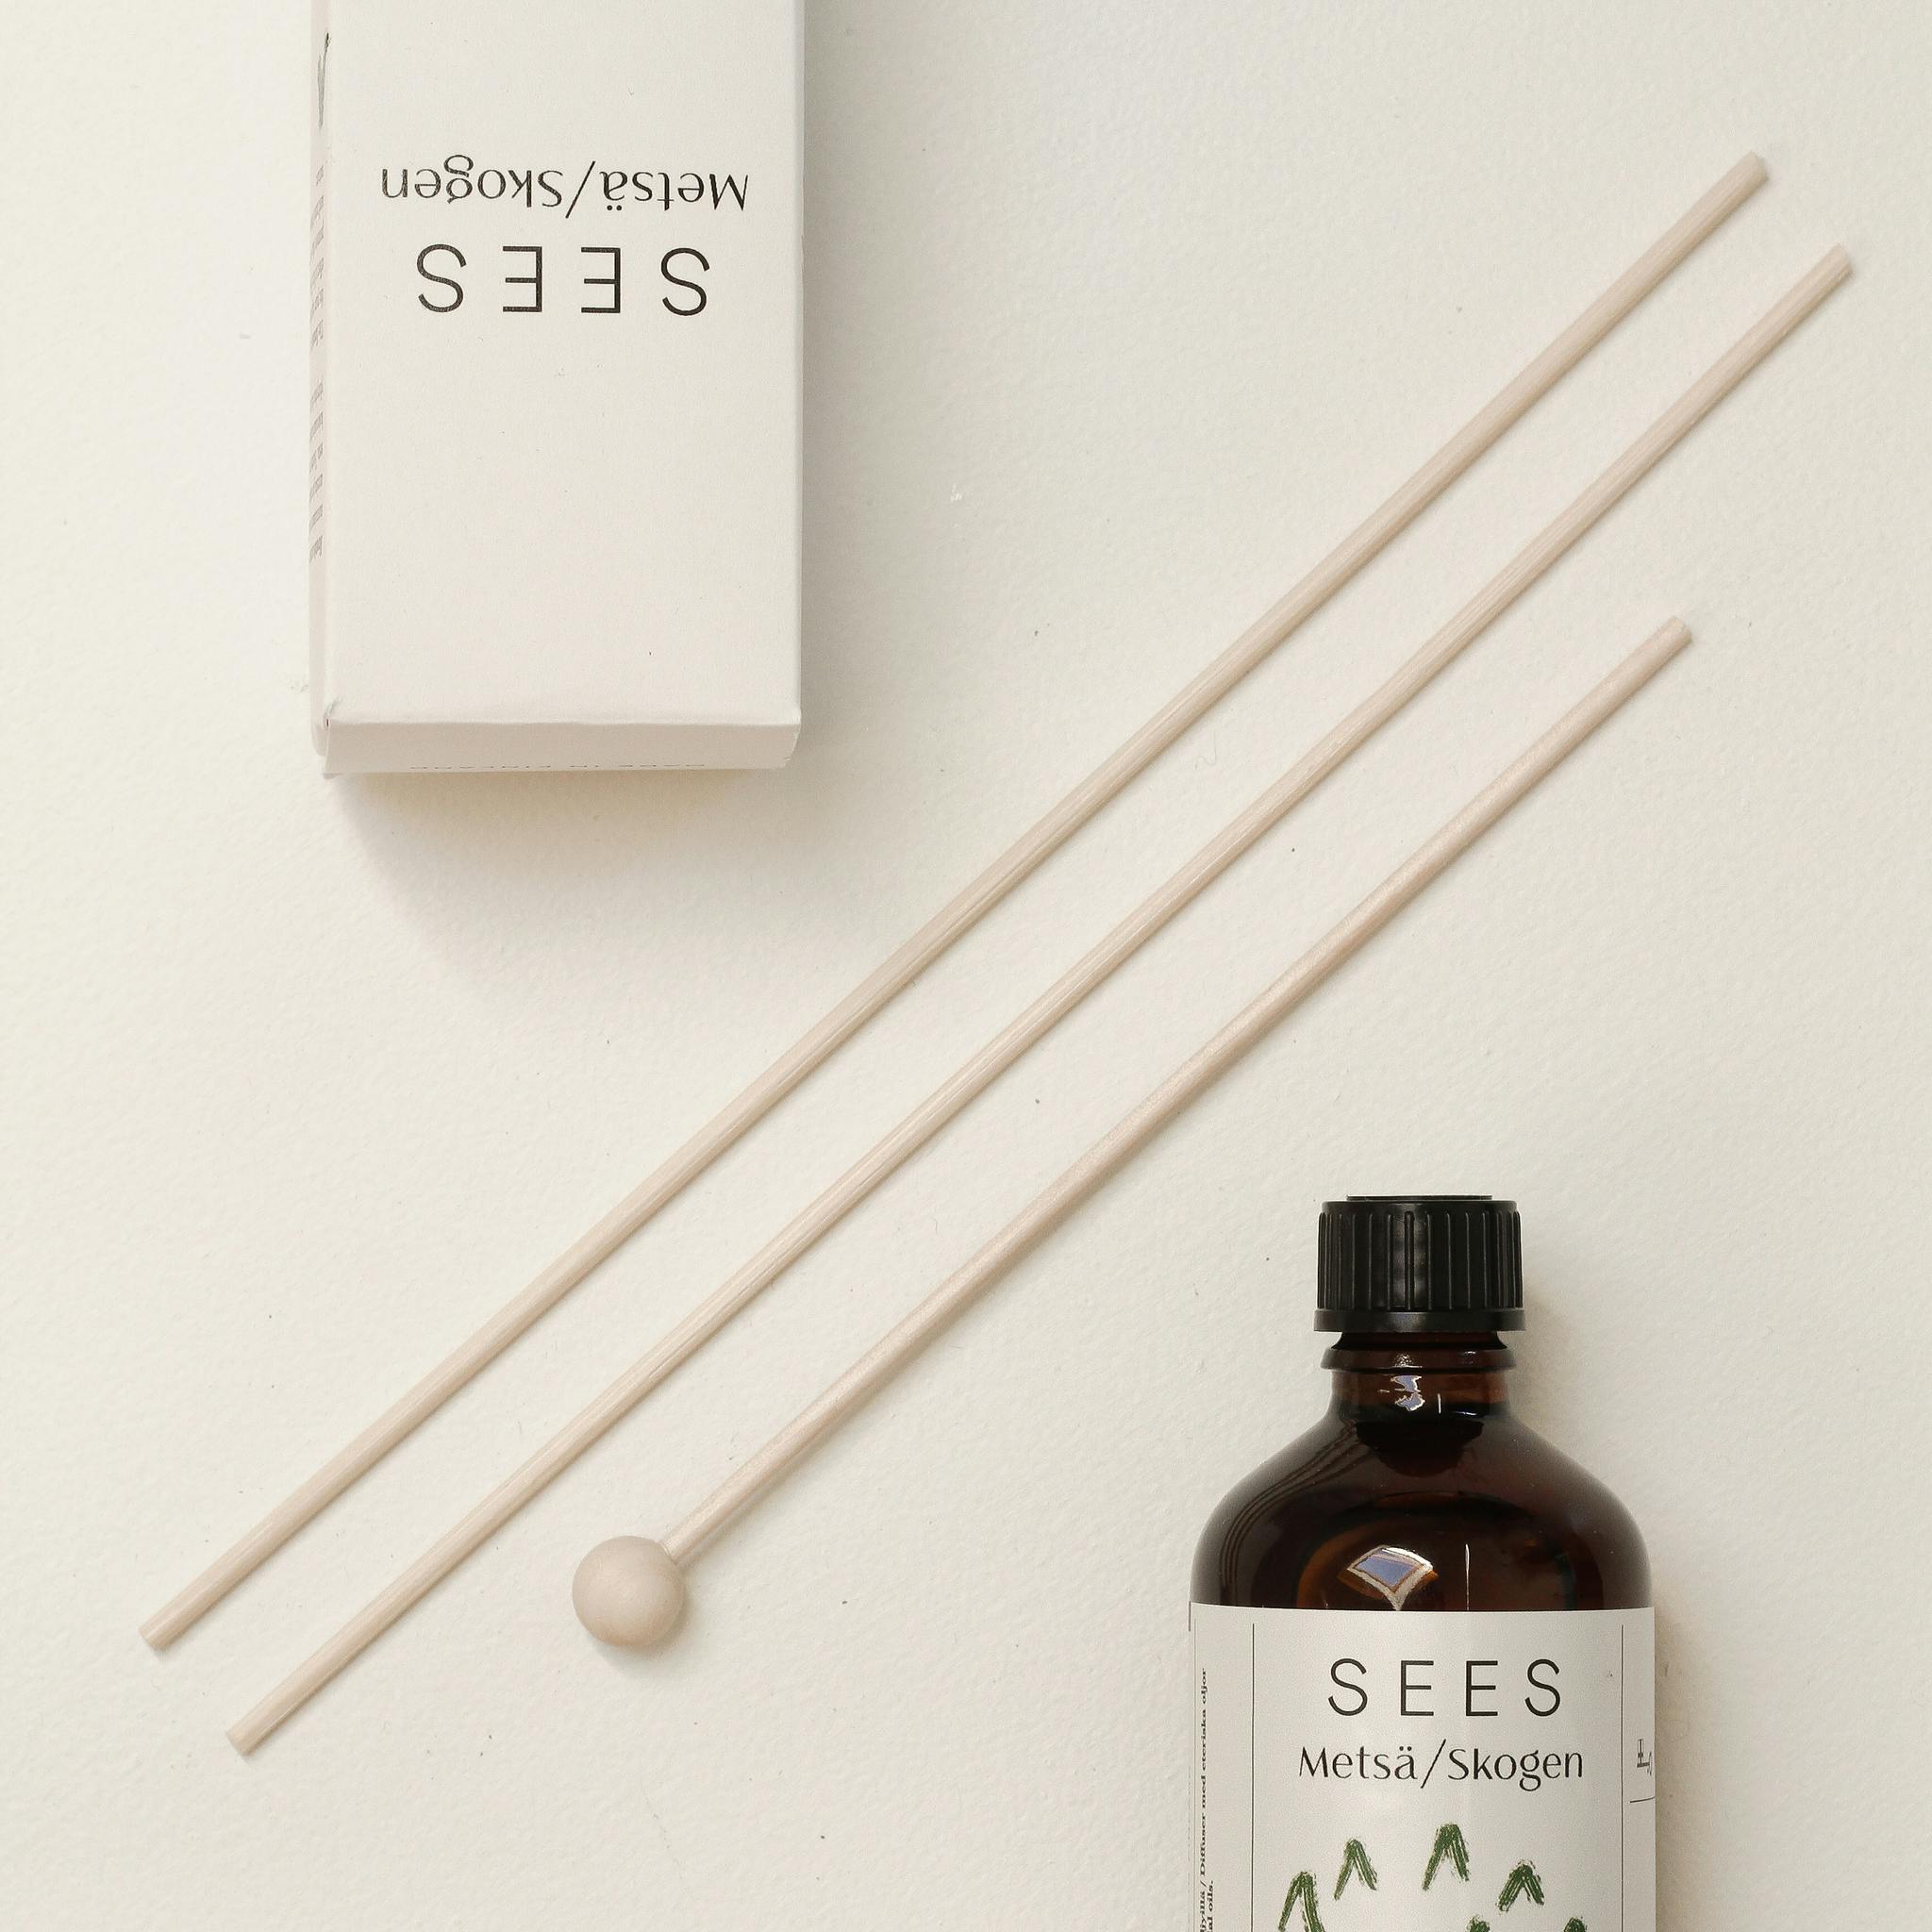 Room diffuser, natural scents, organic, Nordic design, Scandinavian, forest scent, great gifts